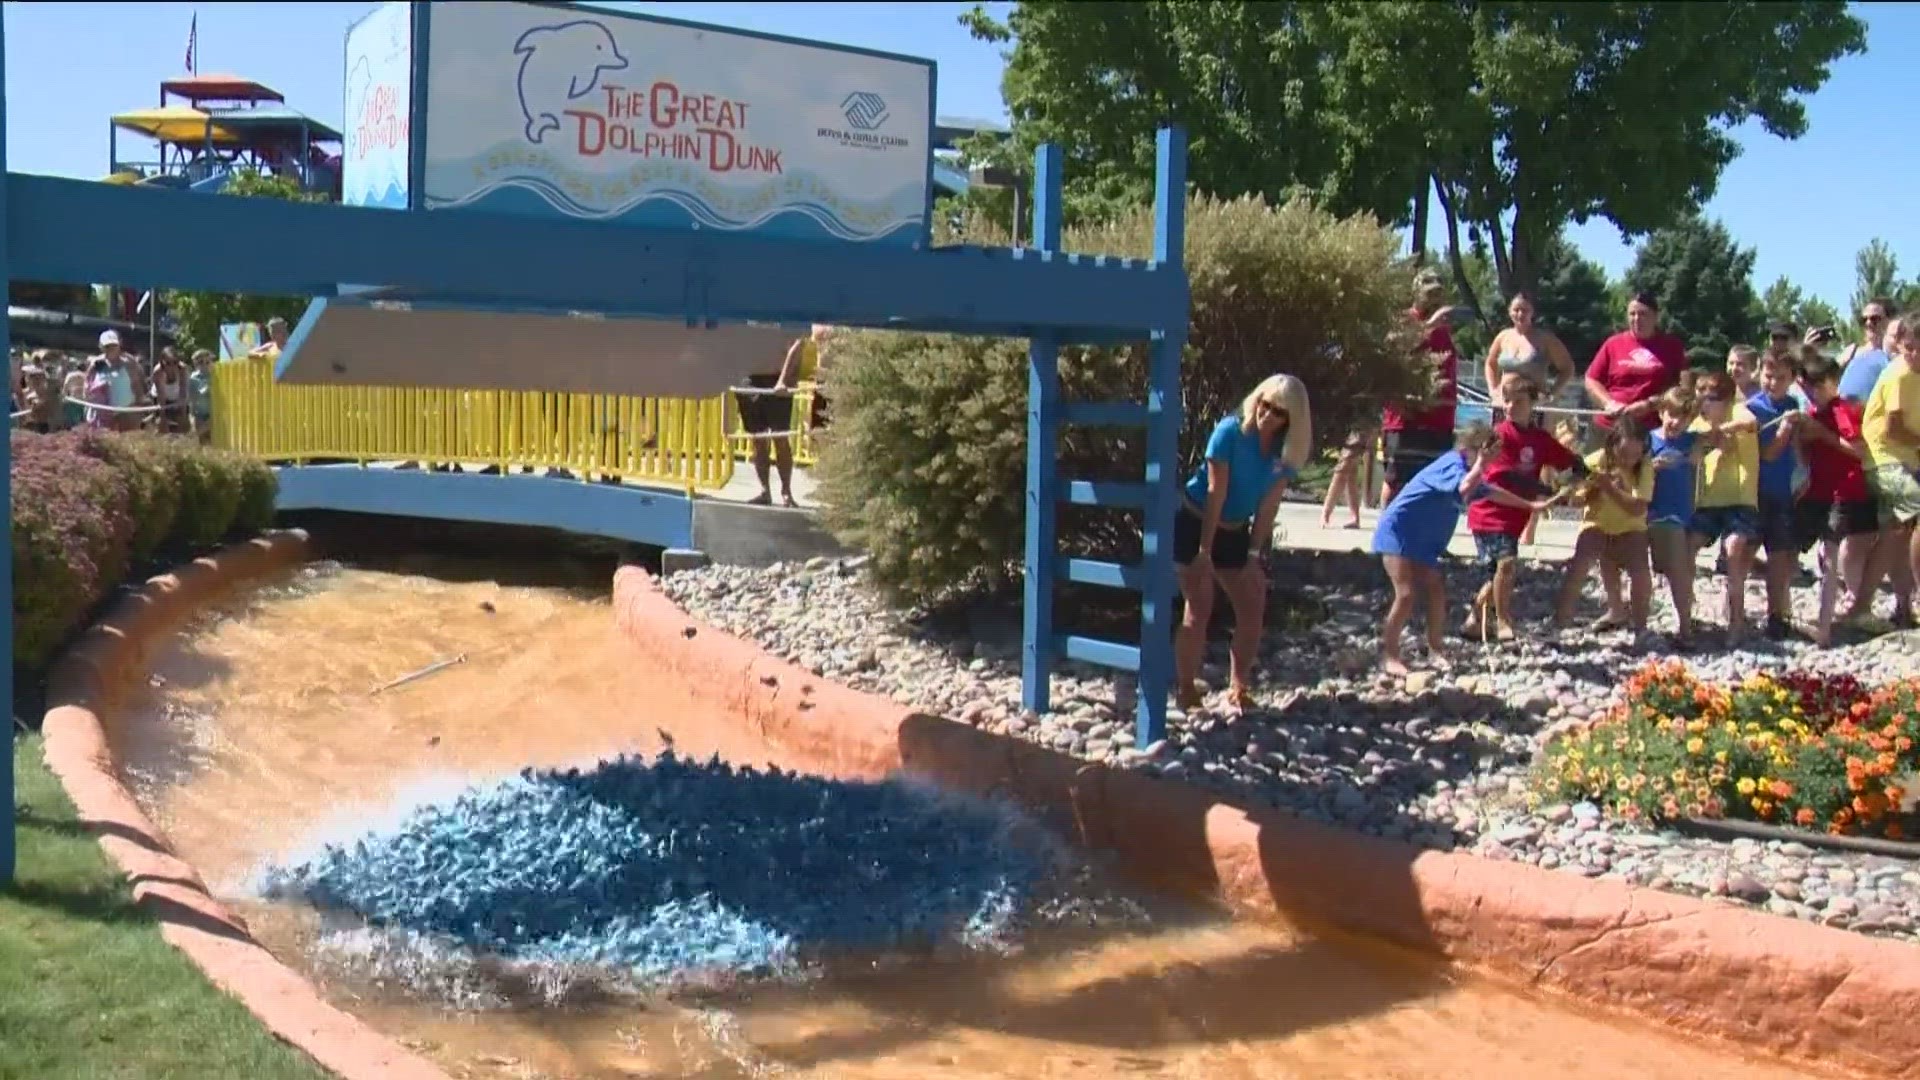 Thousands of blue dolphins raced, the event raised $64,000 this year.